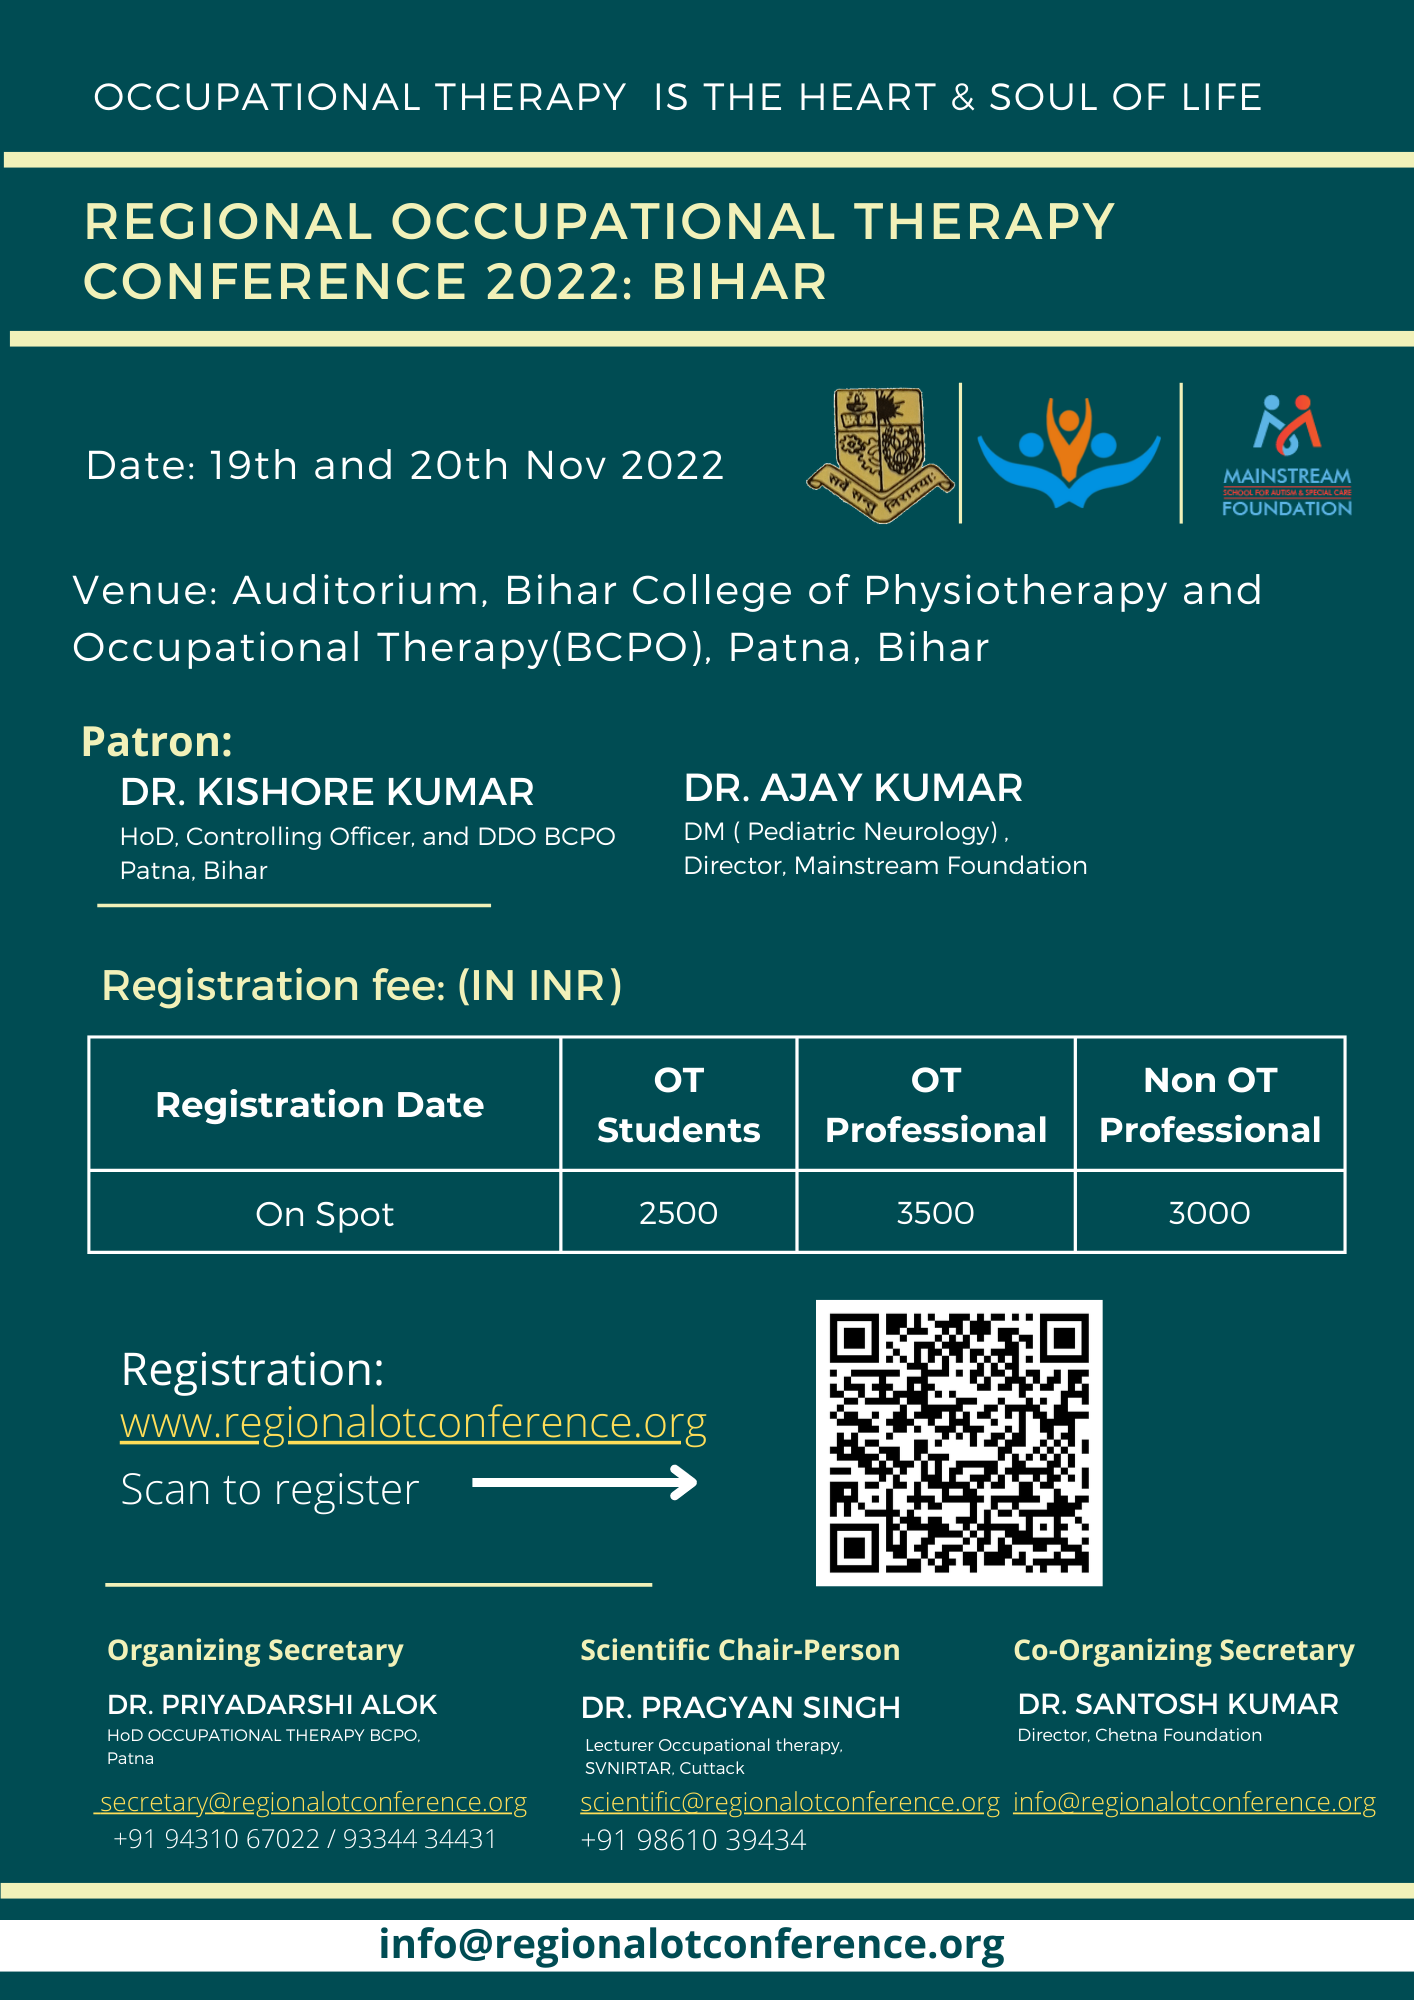 REGIONAL OCCUPATIONAL THERAPY CONFERENCE 2022 : BIHAR